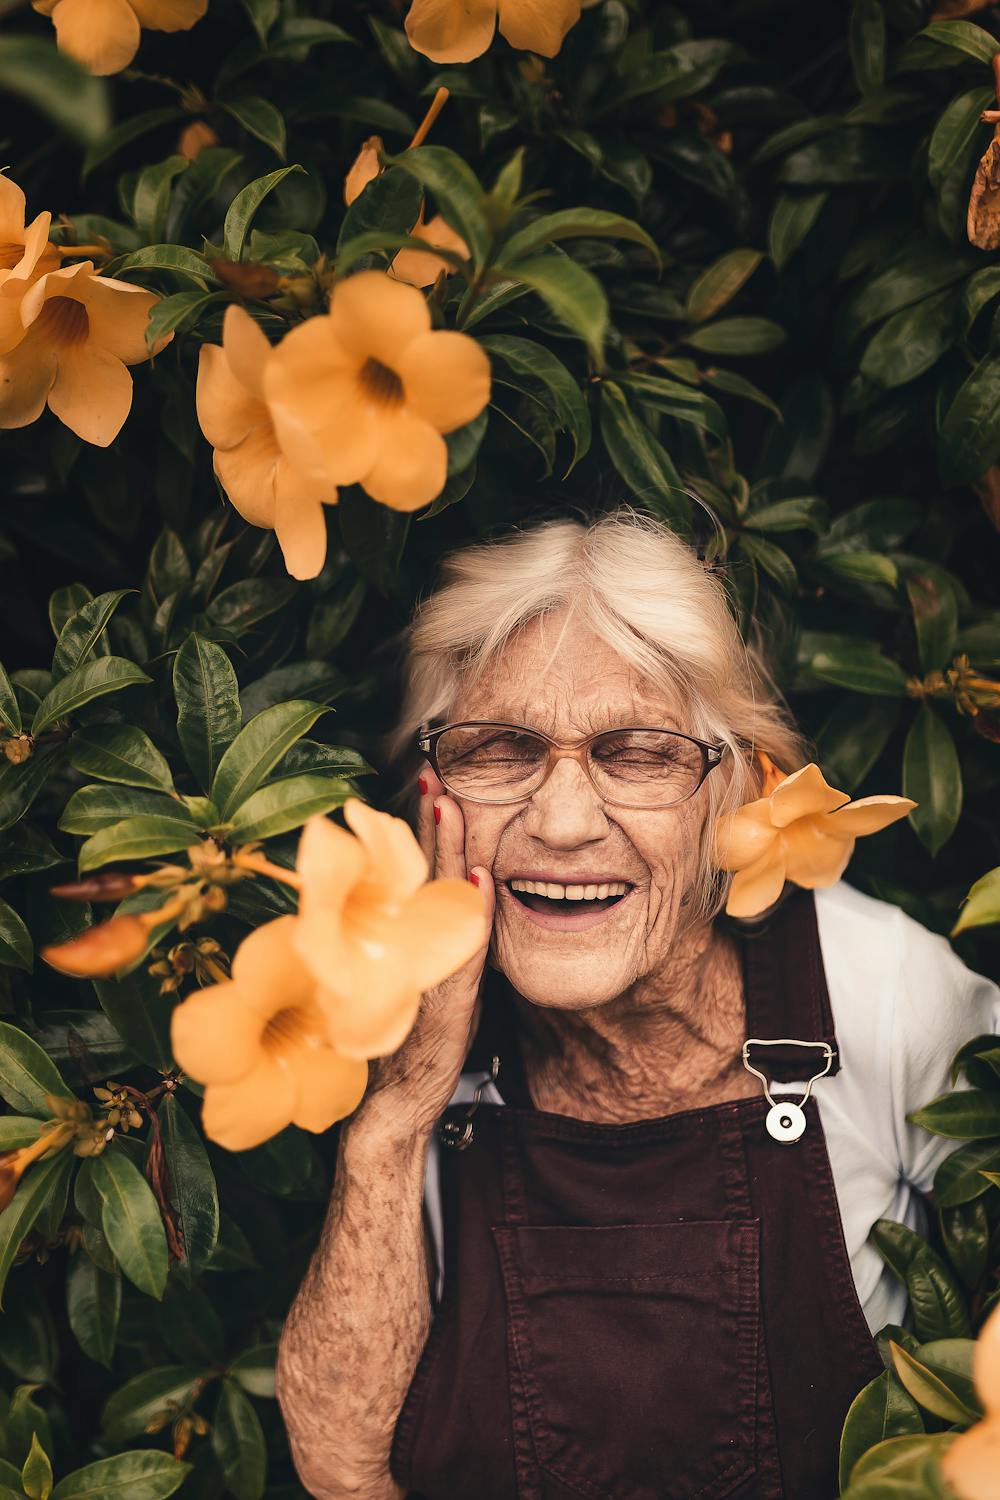 Old woman smiling | Photo: Pexels